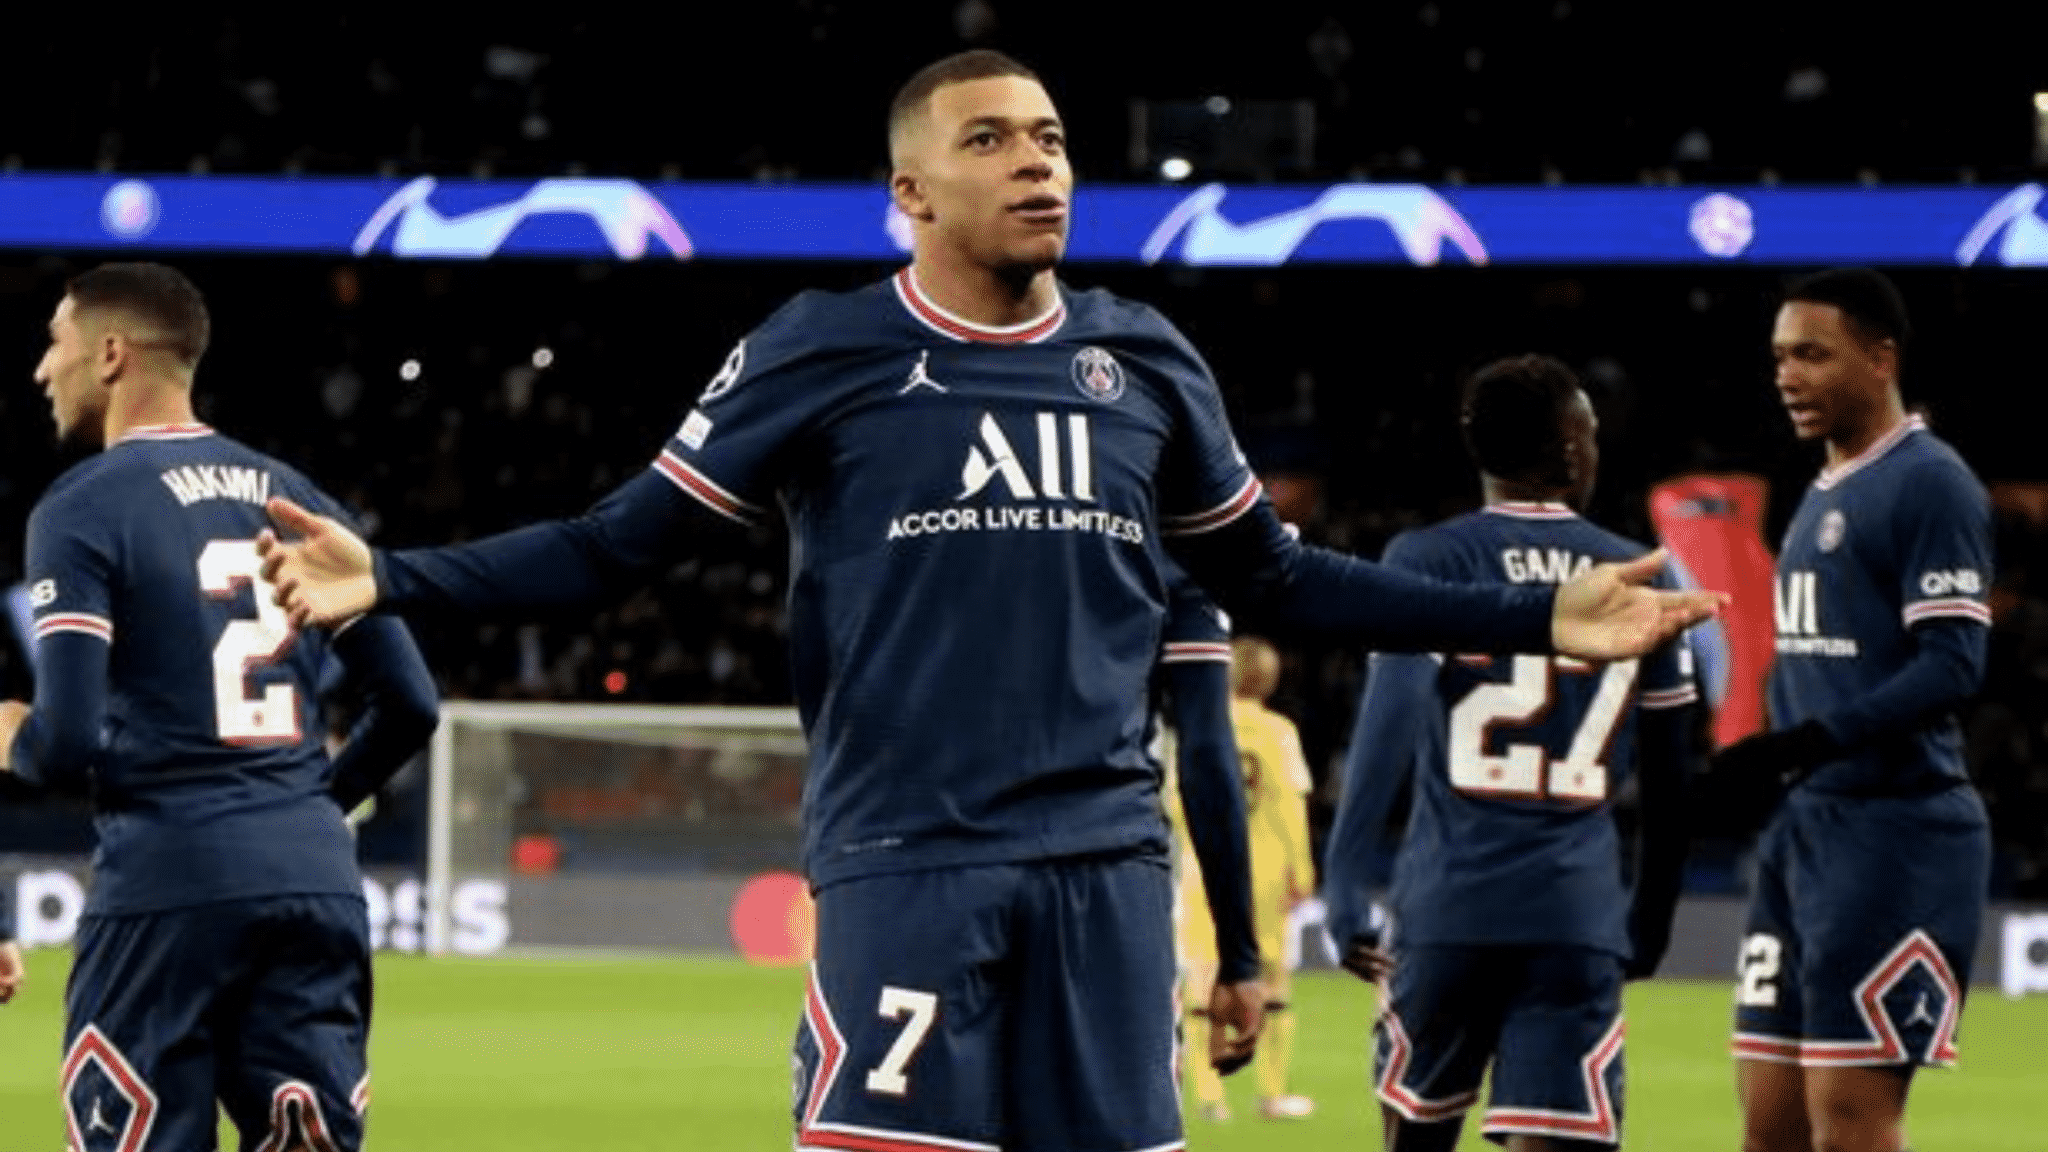 Kylian Mbappe close to Real Madrid move after agreeing personal terms, My Football Facts